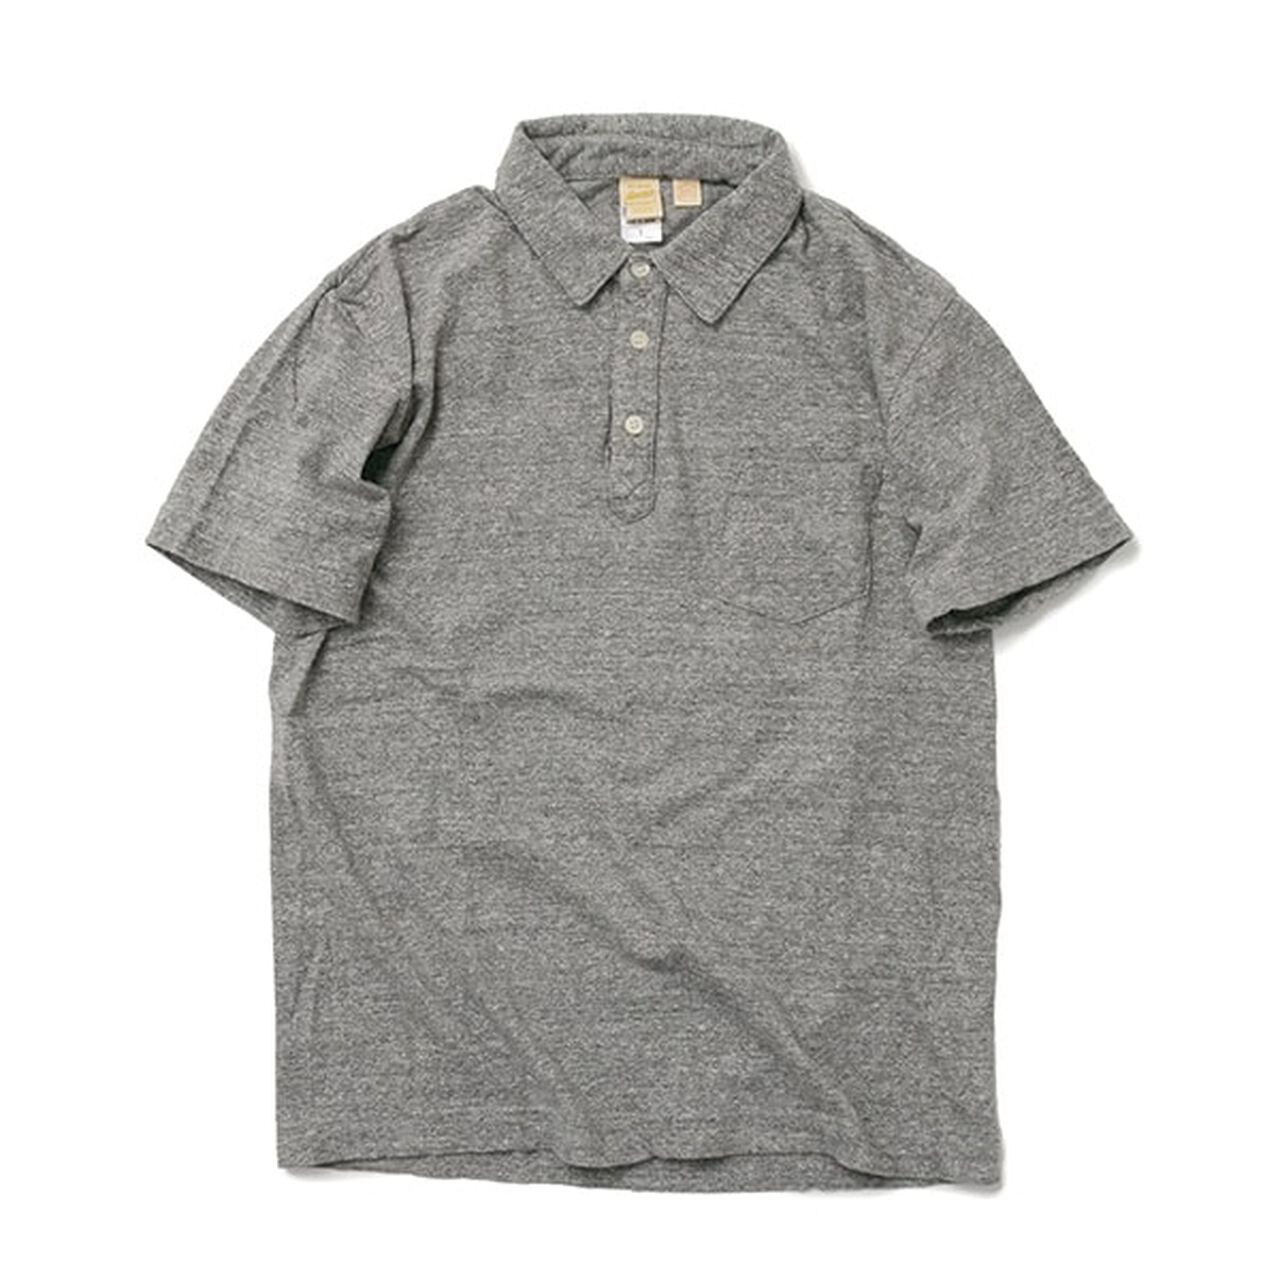 BR-1006 Hanging Jersey Short Sleeve Polo Shirt,Grey, large image number 0